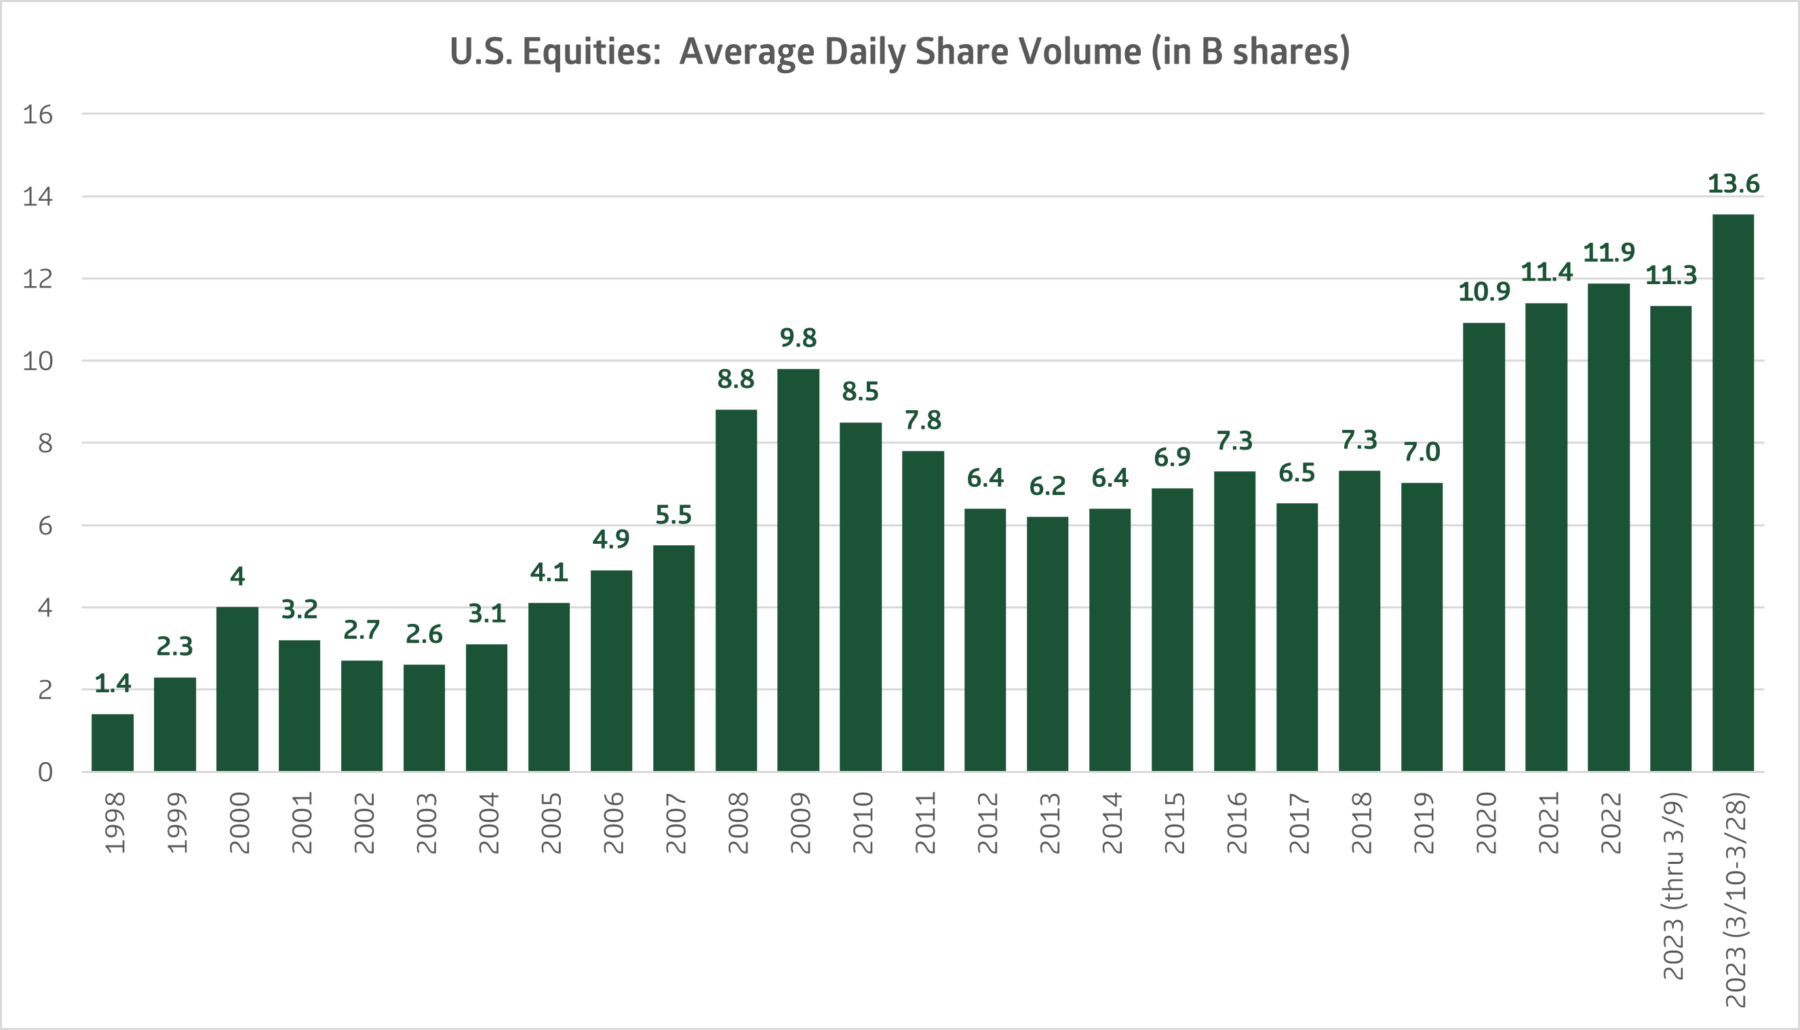 U.S. equities average daily share volumne in B shares from 1998 - March 2023